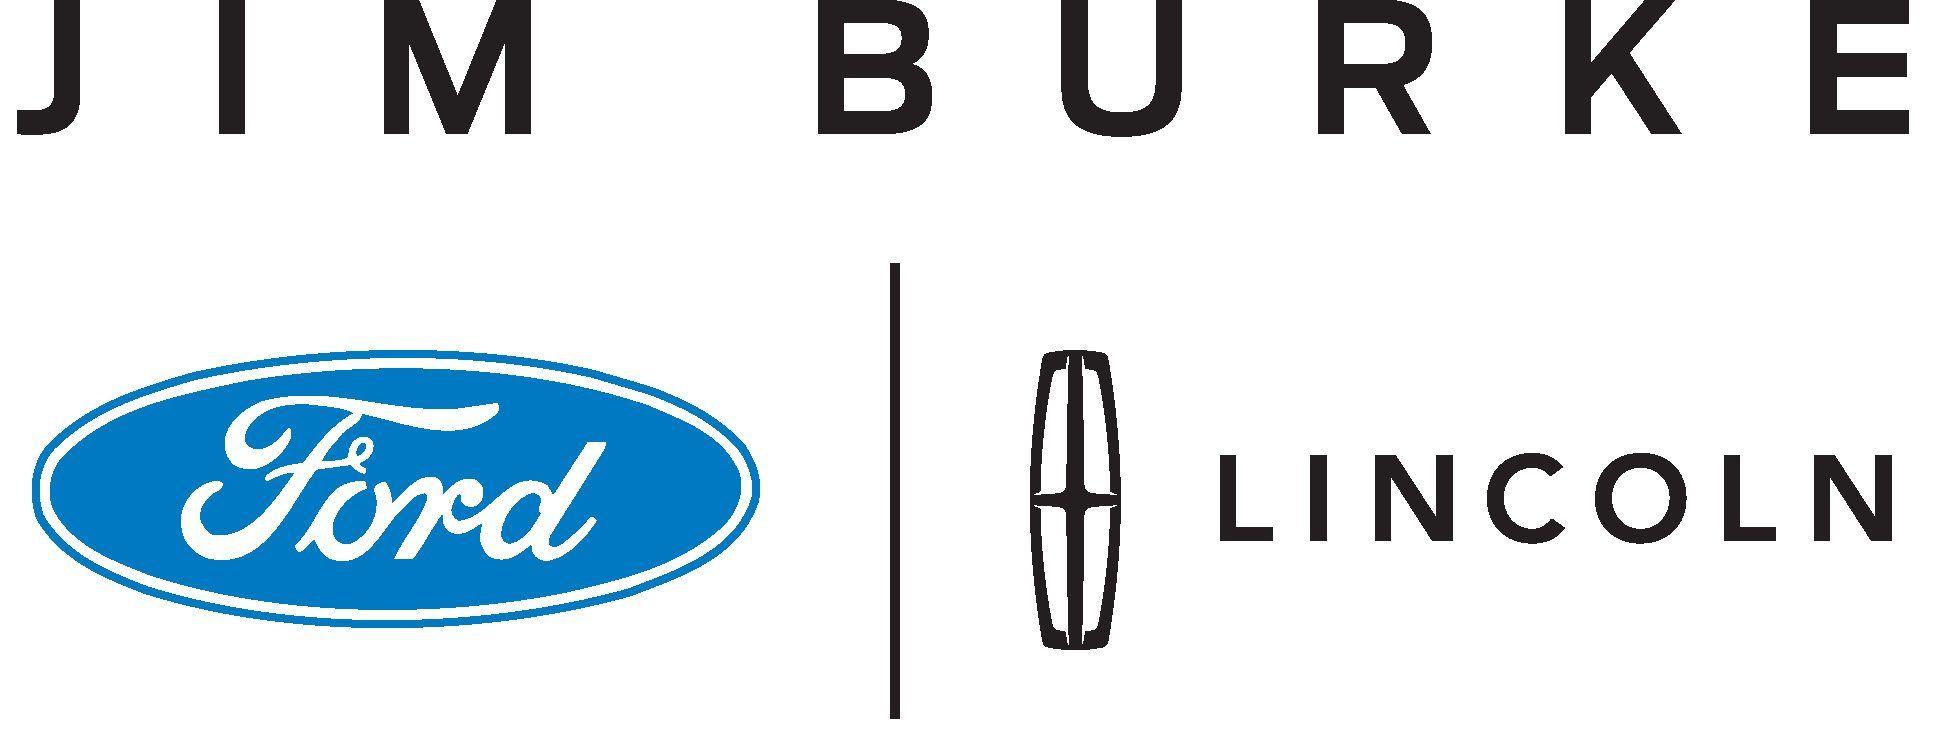 Ford Lincoln Logo - Jim Burke Ford Lincoln Logos - Bakersfield Chamber of Commerce